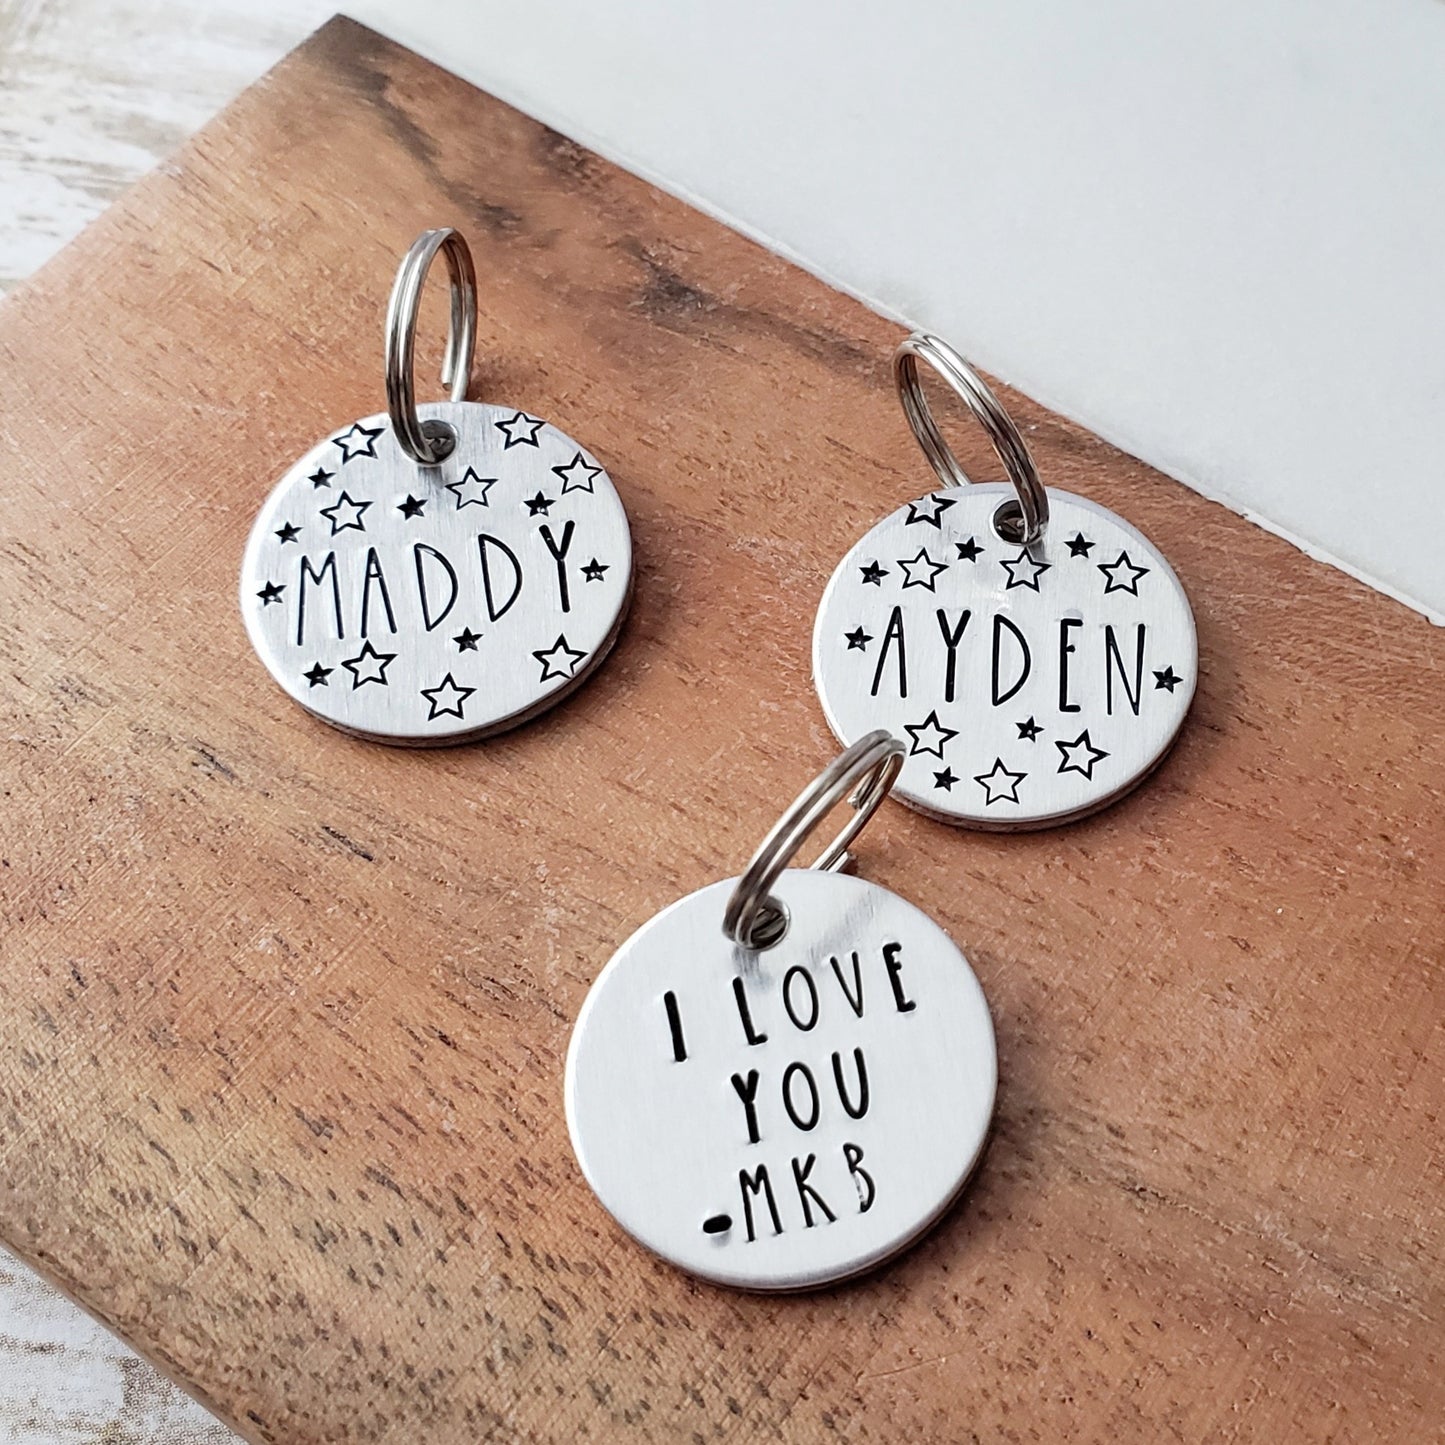 Add On - Personalized Charm for Keychains - Round or Heart